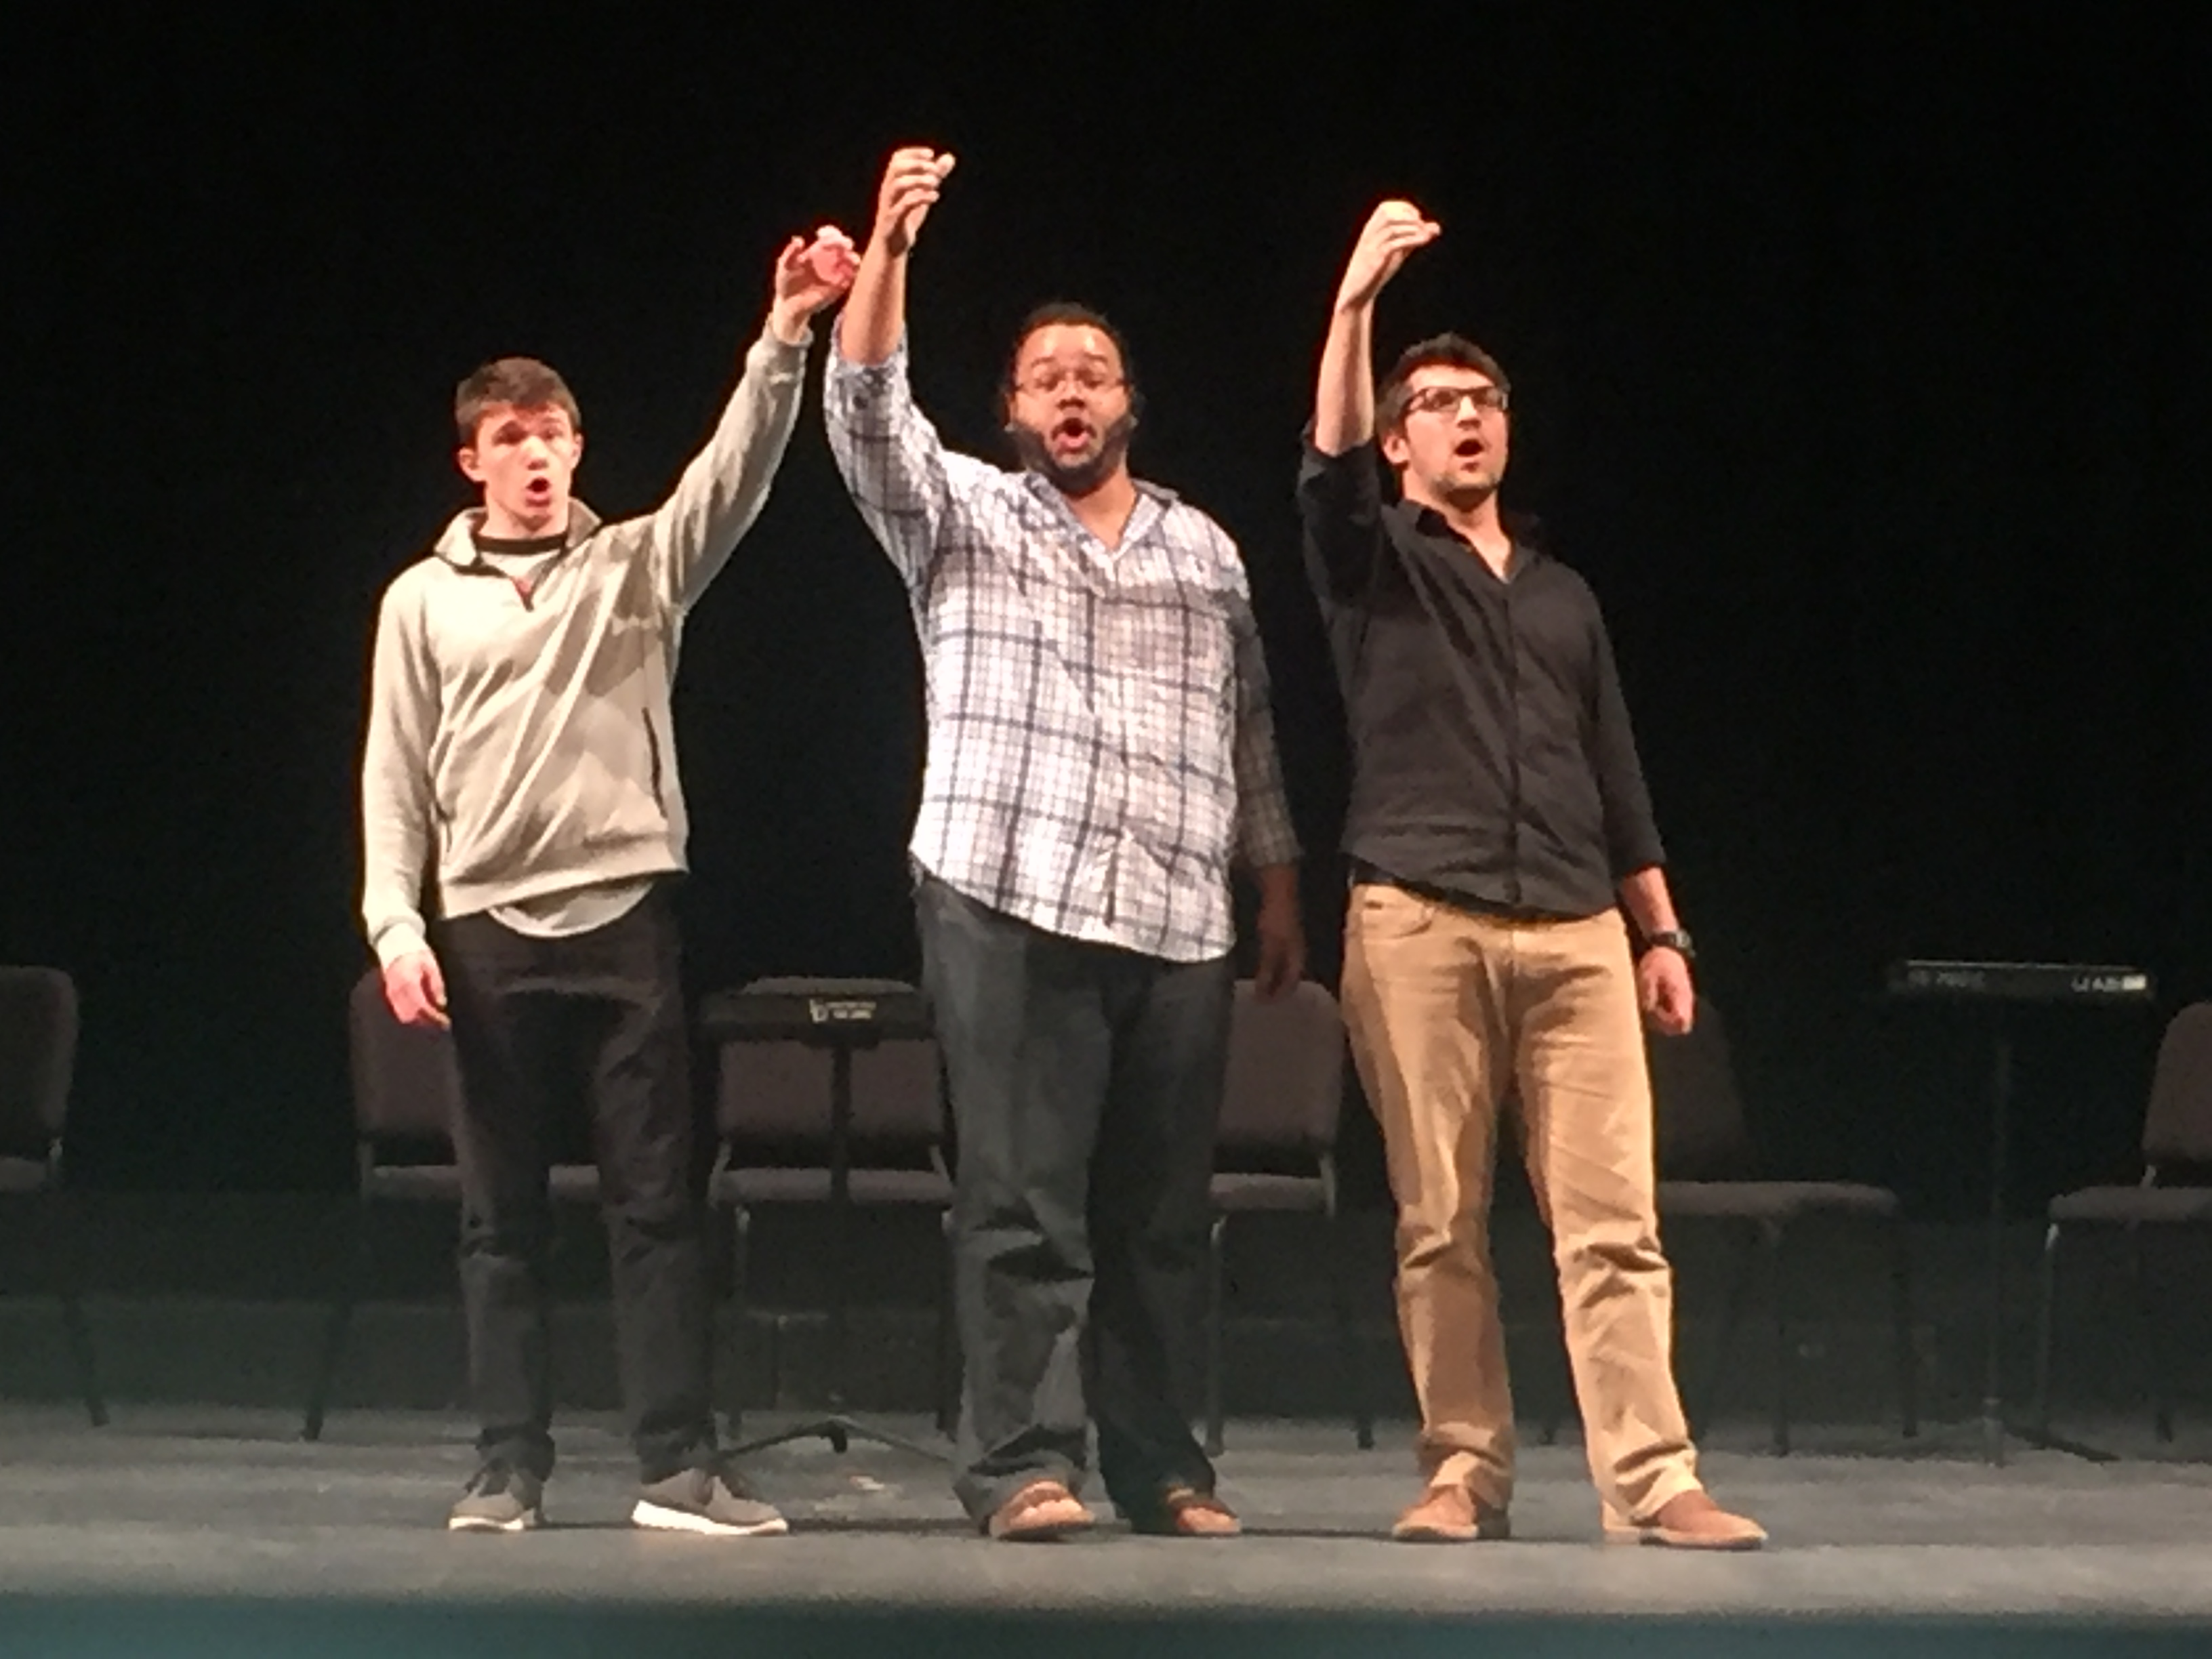 Cast members Benjamin Dutton, Travis Lucas, and Ethan Udovich (l. to r.) rehearsing a scene from Act I of Mozart's Cosi fan tutte